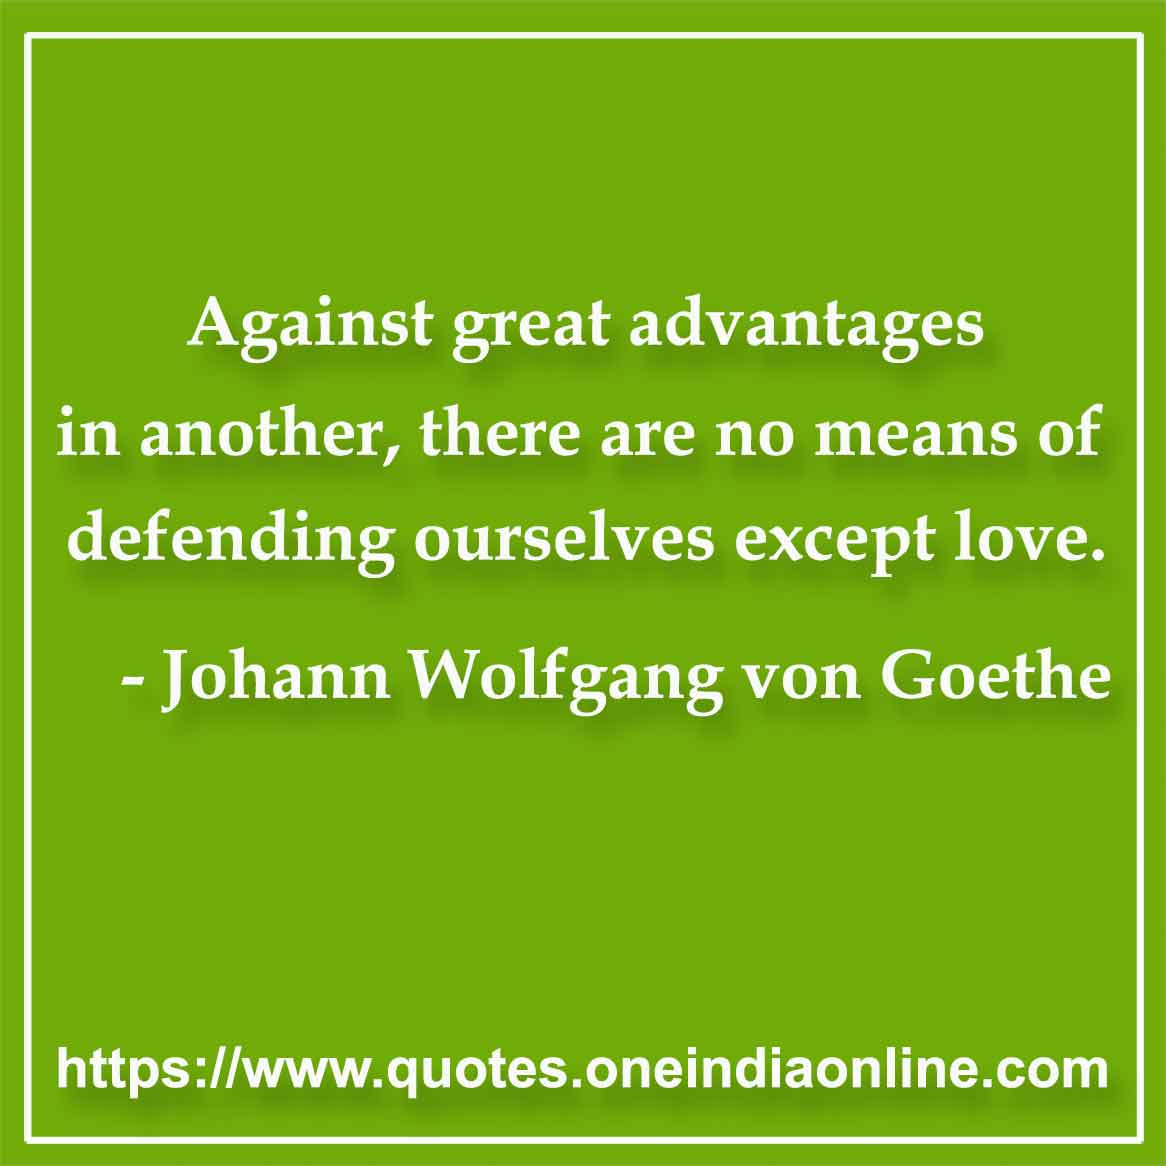 Against great advantages in another, there are no means of defending ourselves except love. 

- Johann Wolfgang von Goethe